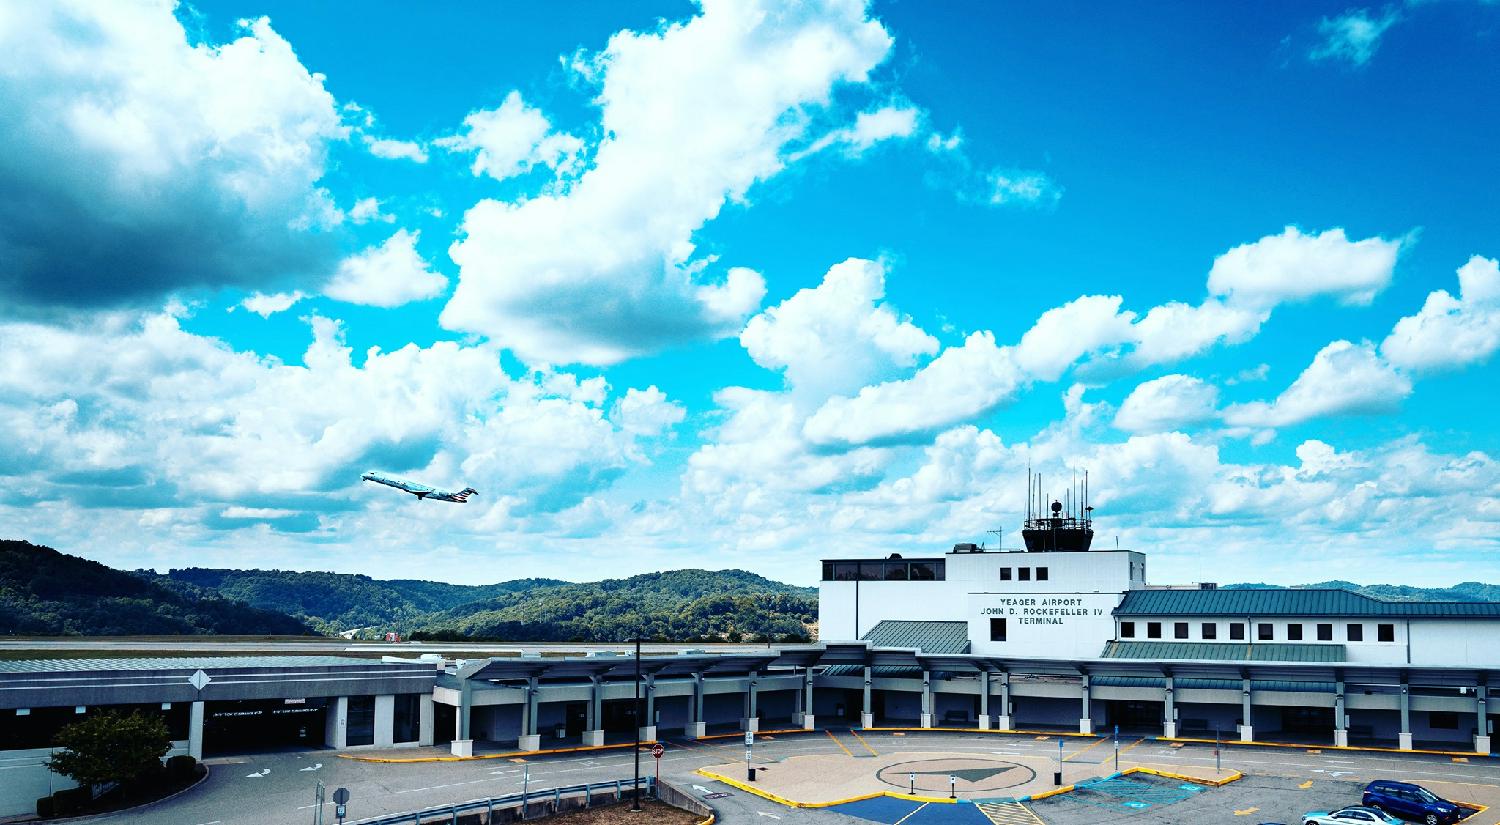 Yeager Airport sits on a hilltop over 300 feet above the valleys of the Elk and Kanawha Rivers.